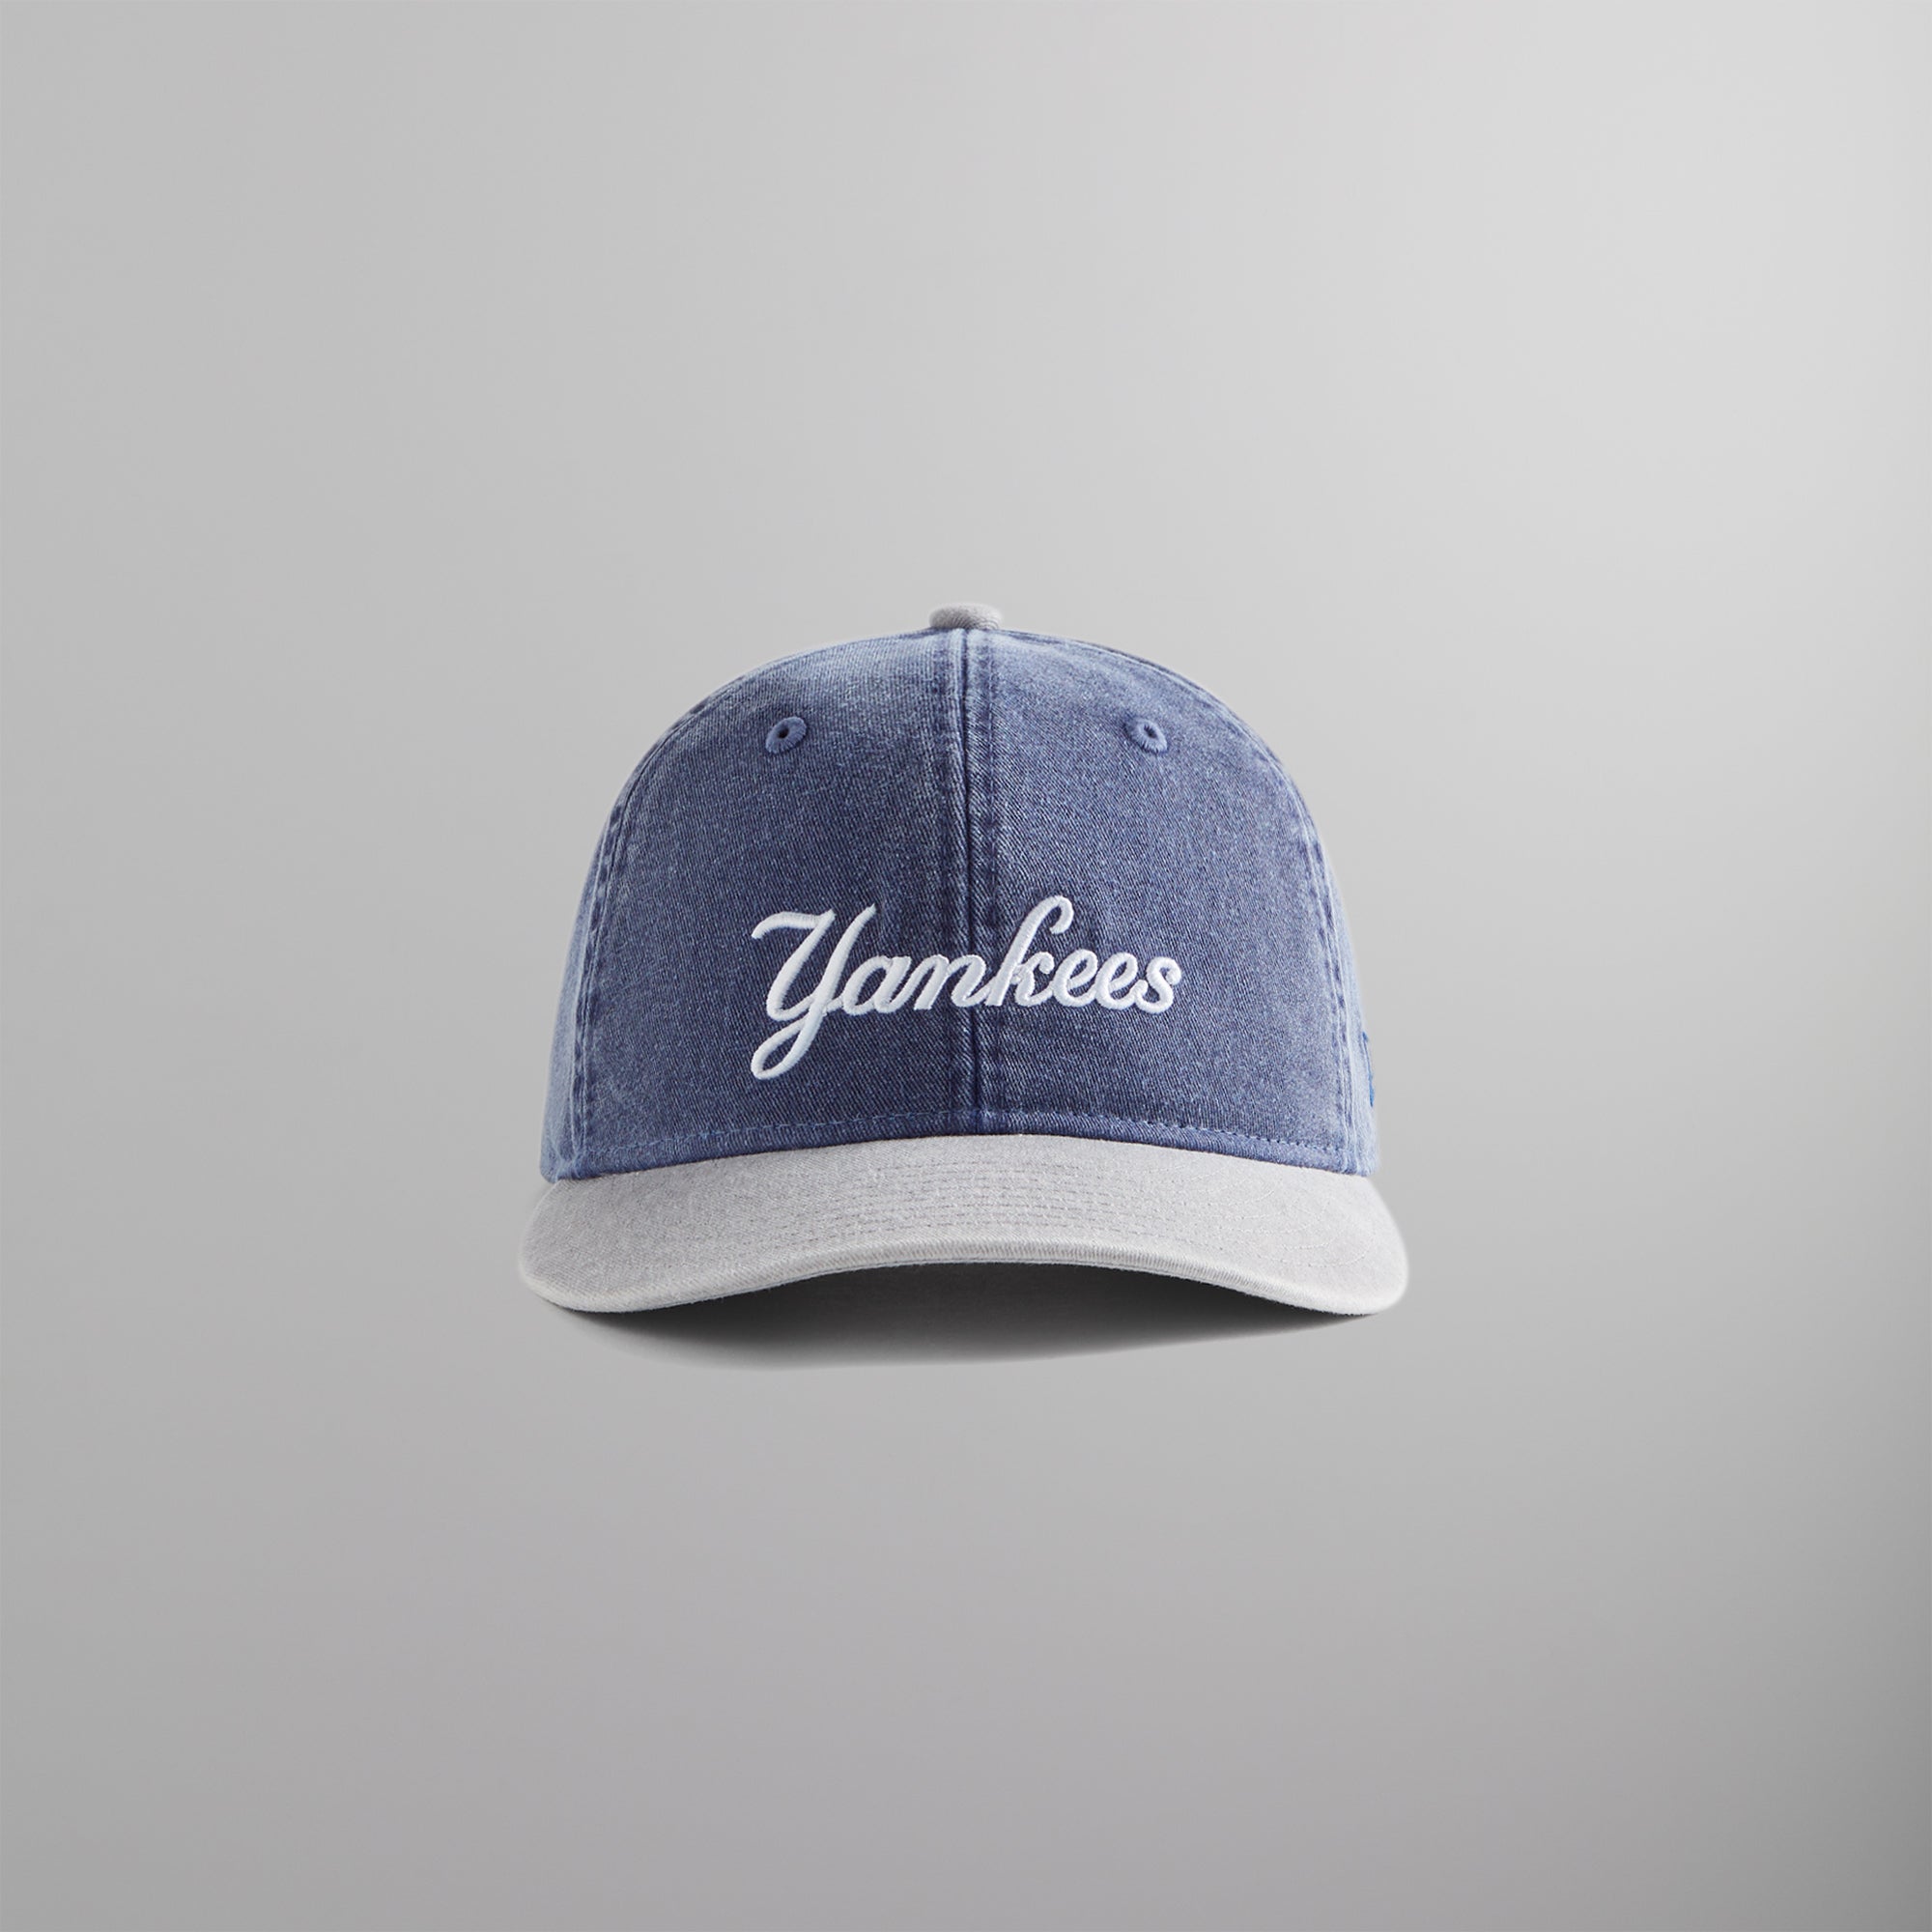 Kith & New Era for Yankees Script 9fifty - Nocturnal